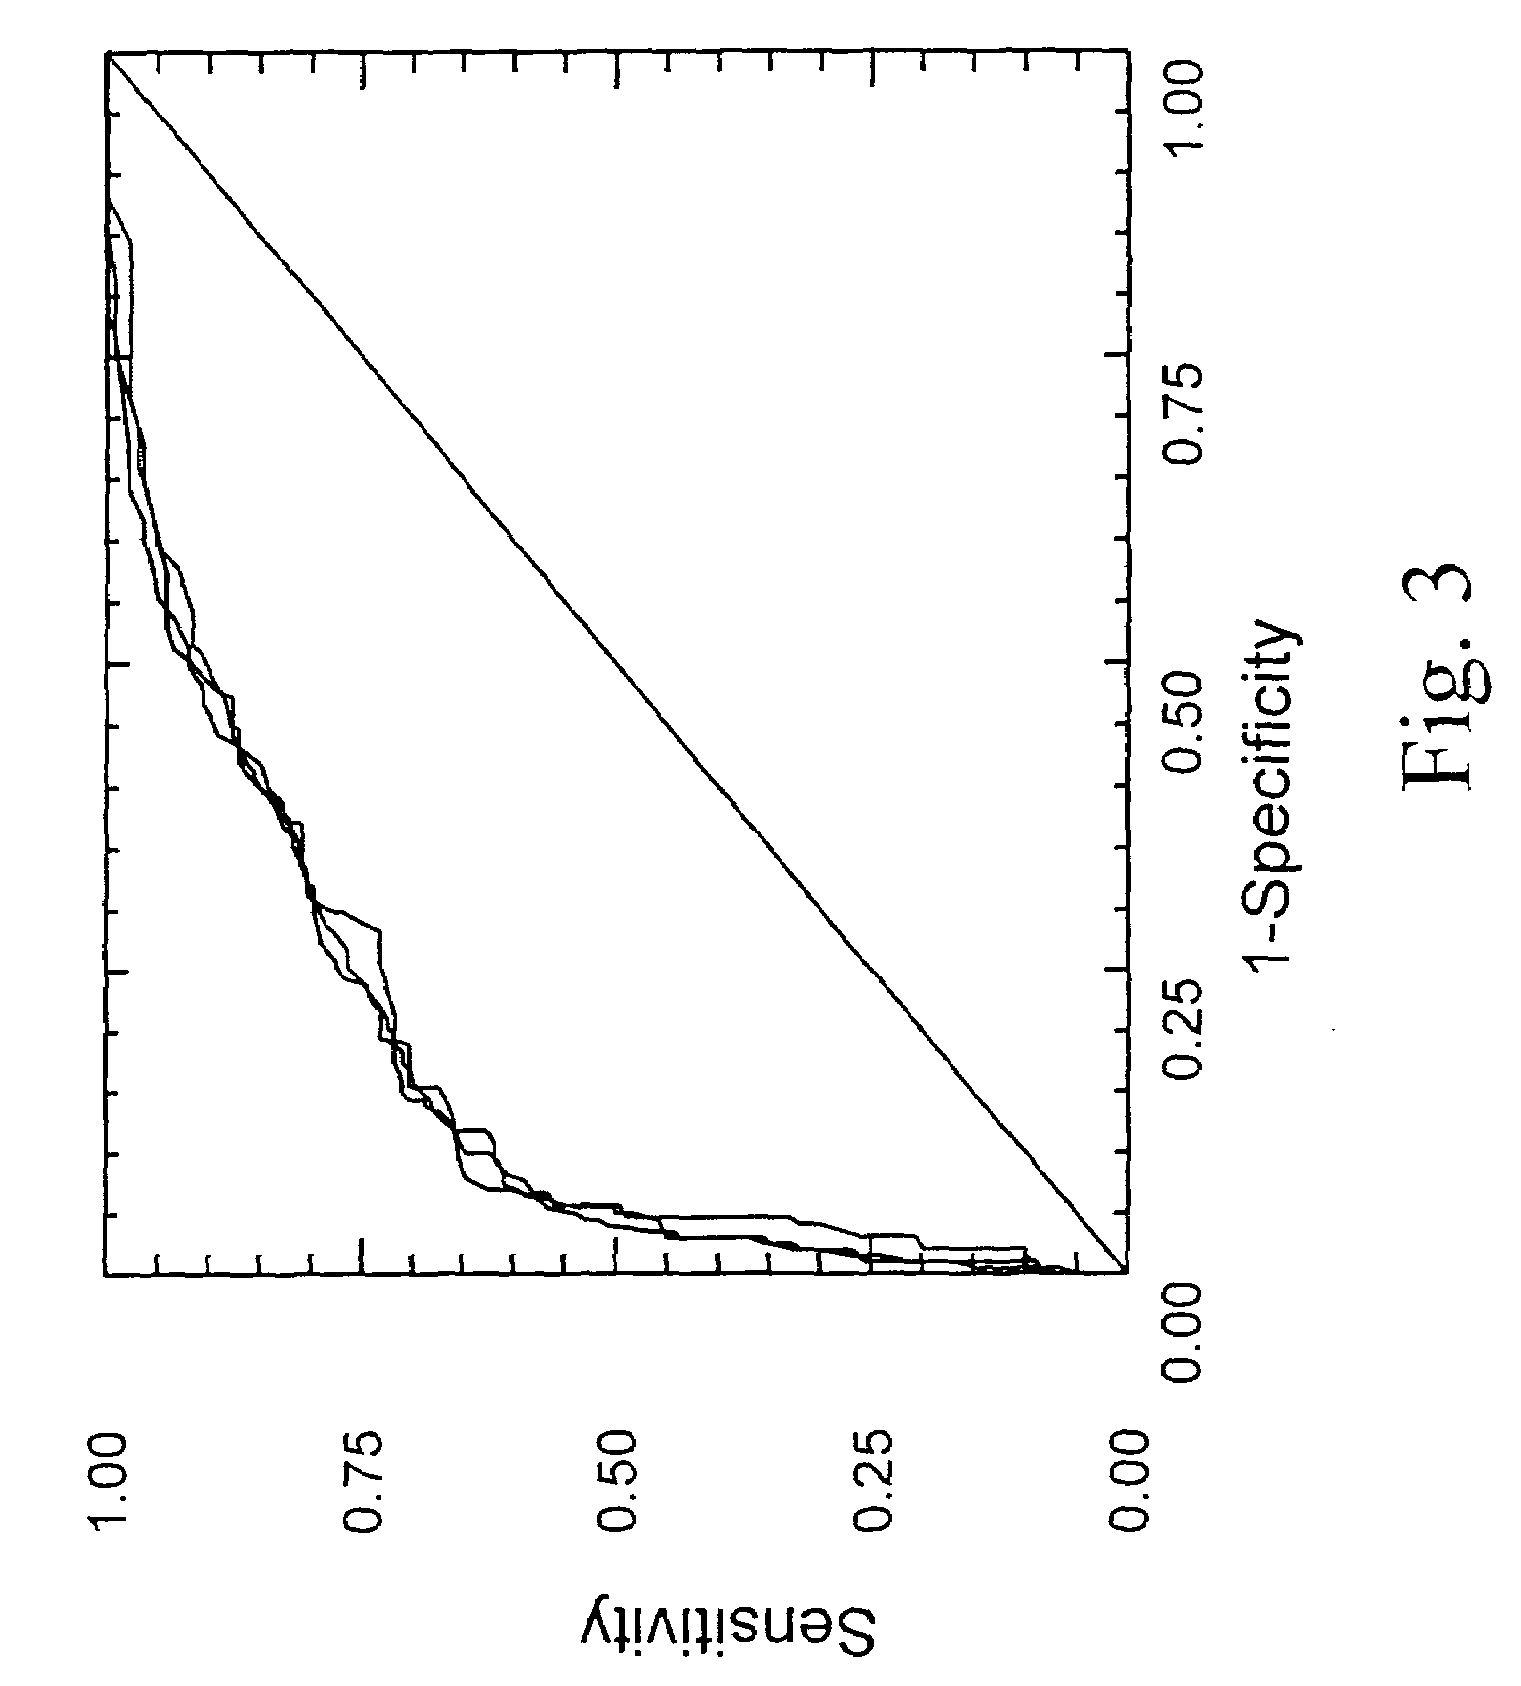 Diagnosis method of inflammatory, fibrotic or cancerous disease using biochemical markers